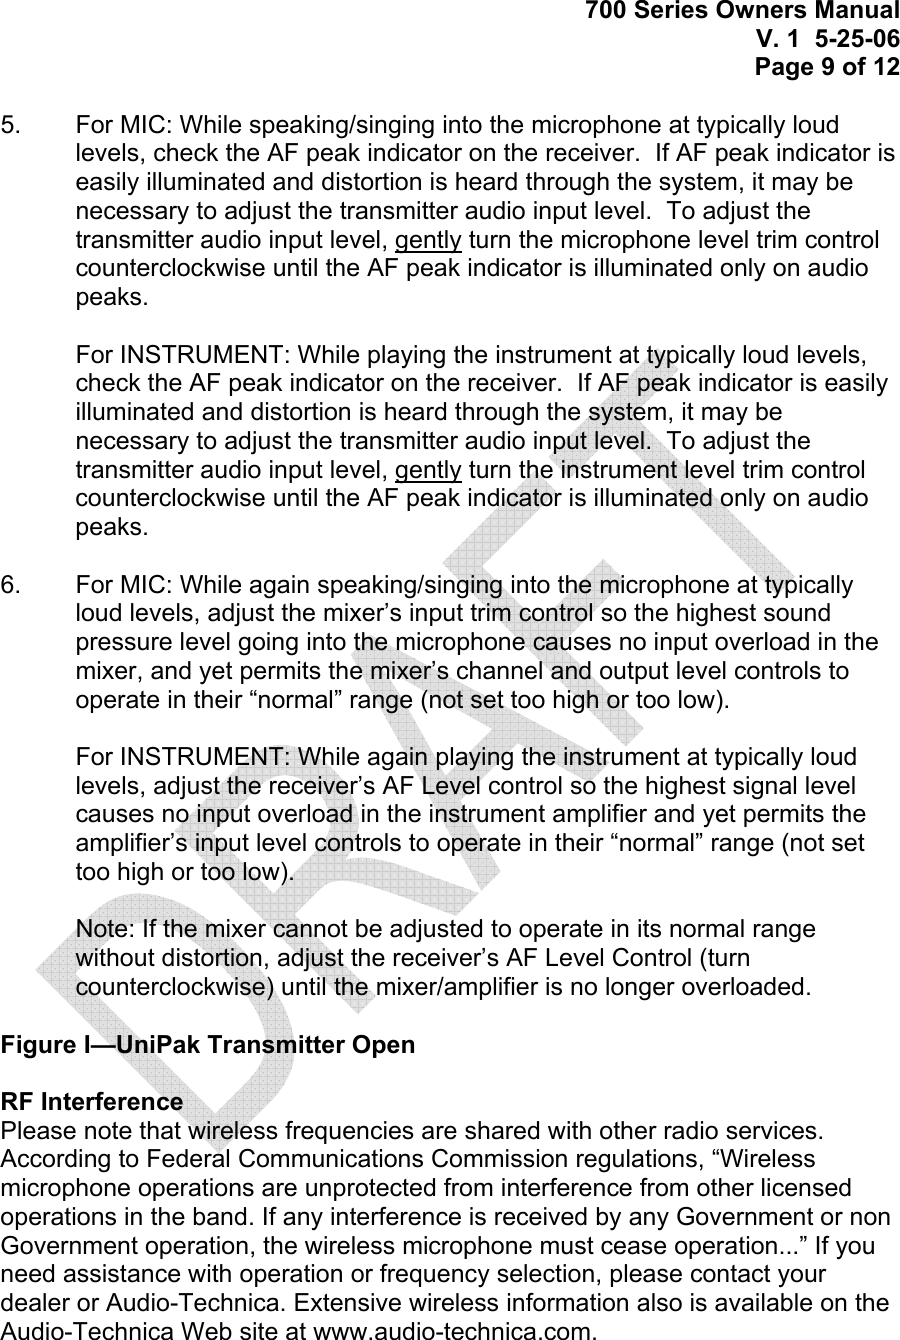 700 Series Owners Manual V. 1  5-25-06 Page 9 of 12  5.   For MIC: While speaking/singing into the microphone at typically loud levels, check the AF peak indicator on the receiver.  If AF peak indicator is easily illuminated and distortion is heard through the system, it may be necessary to adjust the transmitter audio input level.  To adjust the transmitter audio input level, gently turn the microphone level trim control counterclockwise until the AF peak indicator is illuminated only on audio peaks.   For INSTRUMENT: While playing the instrument at typically loud levels, check the AF peak indicator on the receiver.  If AF peak indicator is easily illuminated and distortion is heard through the system, it may be necessary to adjust the transmitter audio input level.  To adjust the transmitter audio input level, gently turn the instrument level trim control counterclockwise until the AF peak indicator is illuminated only on audio peaks.   6.   For MIC: While again speaking/singing into the microphone at typically loud levels, adjust the mixer’s input trim control so the highest sound pressure level going into the microphone causes no input overload in the mixer, and yet permits the mixer’s channel and output level controls to operate in their “normal” range (not set too high or too low).   For INSTRUMENT: While again playing the instrument at typically loud levels, adjust the receiver’s AF Level control so the highest signal level causes no input overload in the instrument amplifier and yet permits the amplifier’s input level controls to operate in their “normal” range (not set too high or too low).  Note: If the mixer cannot be adjusted to operate in its normal range without distortion, adjust the receiver’s AF Level Control (turn counterclockwise) until the mixer/amplifier is no longer overloaded.     Figure I—UniPak Transmitter Open  RF Interference Please note that wireless frequencies are shared with other radio services. According to Federal Communications Commission regulations, “Wireless microphone operations are unprotected from interference from other licensed operations in the band. If any interference is received by any Government or non Government operation, the wireless microphone must cease operation...” If you need assistance with operation or frequency selection, please contact your dealer or Audio-Technica. Extensive wireless information also is available on the Audio-Technica Web site at www.audio-technica.com.   